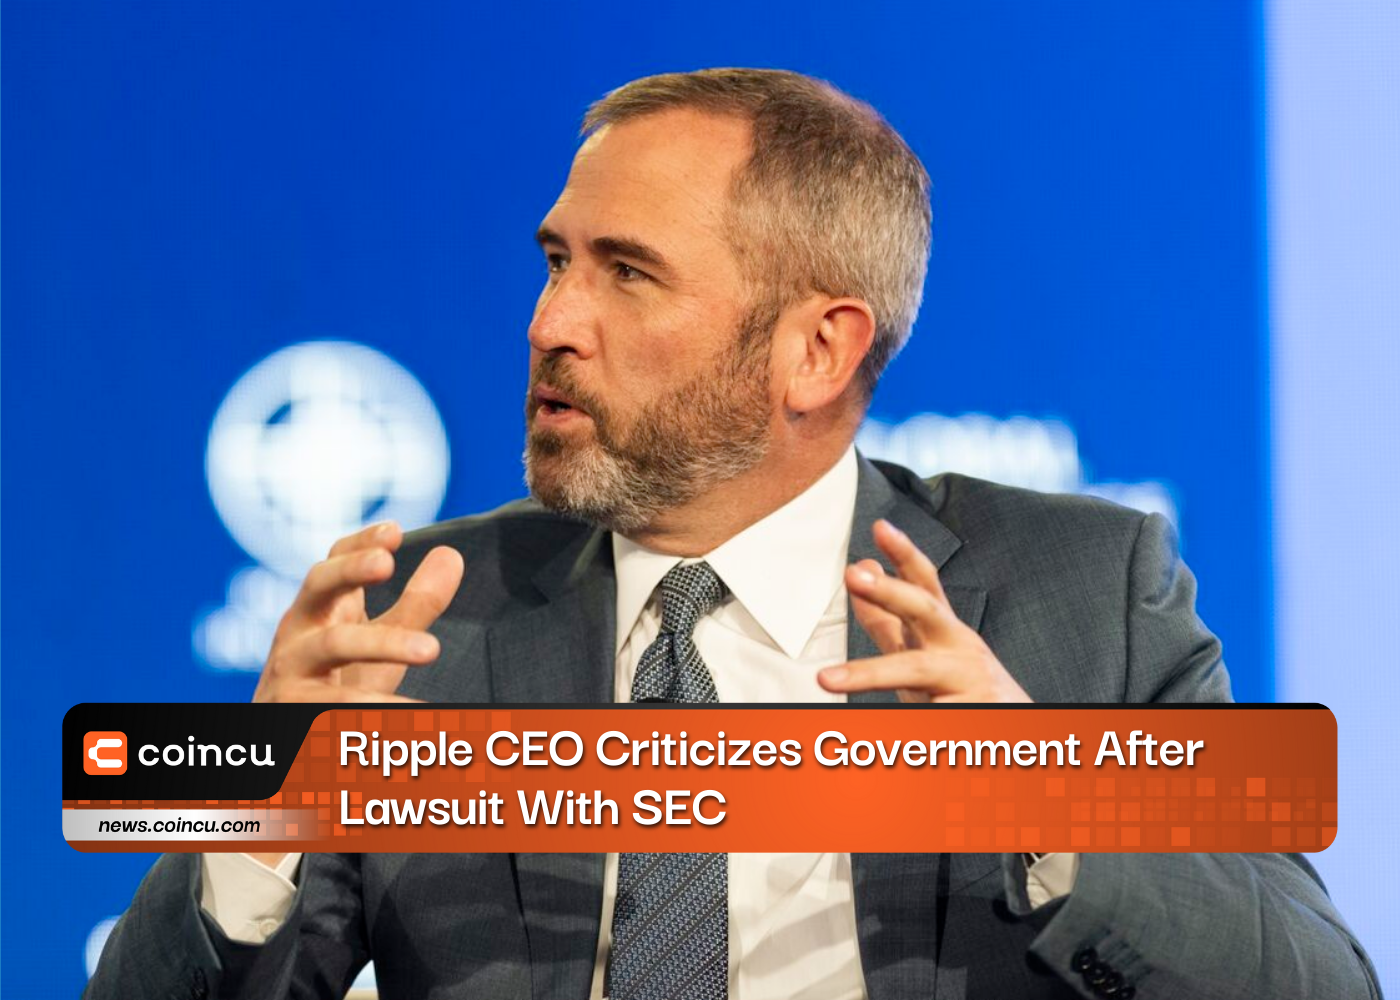 Ripple CEO Criticizes Government After Lawsuit With SEC